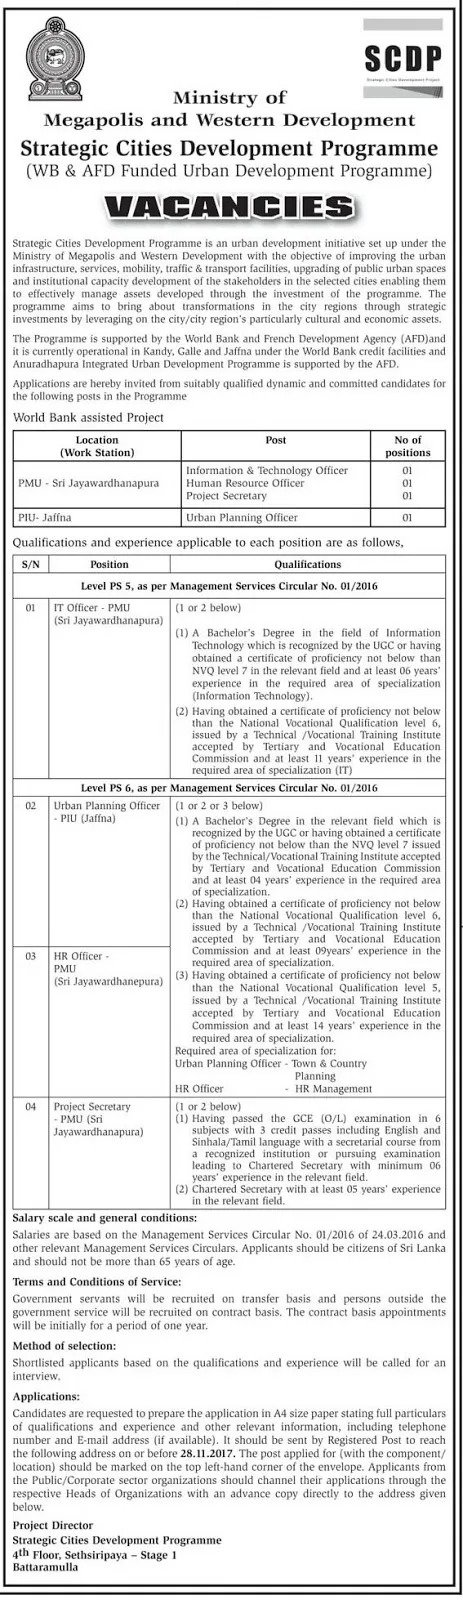 IT Officer / Urban Planning Officer / HR Officer Vacancies at Ministry of Megapolis